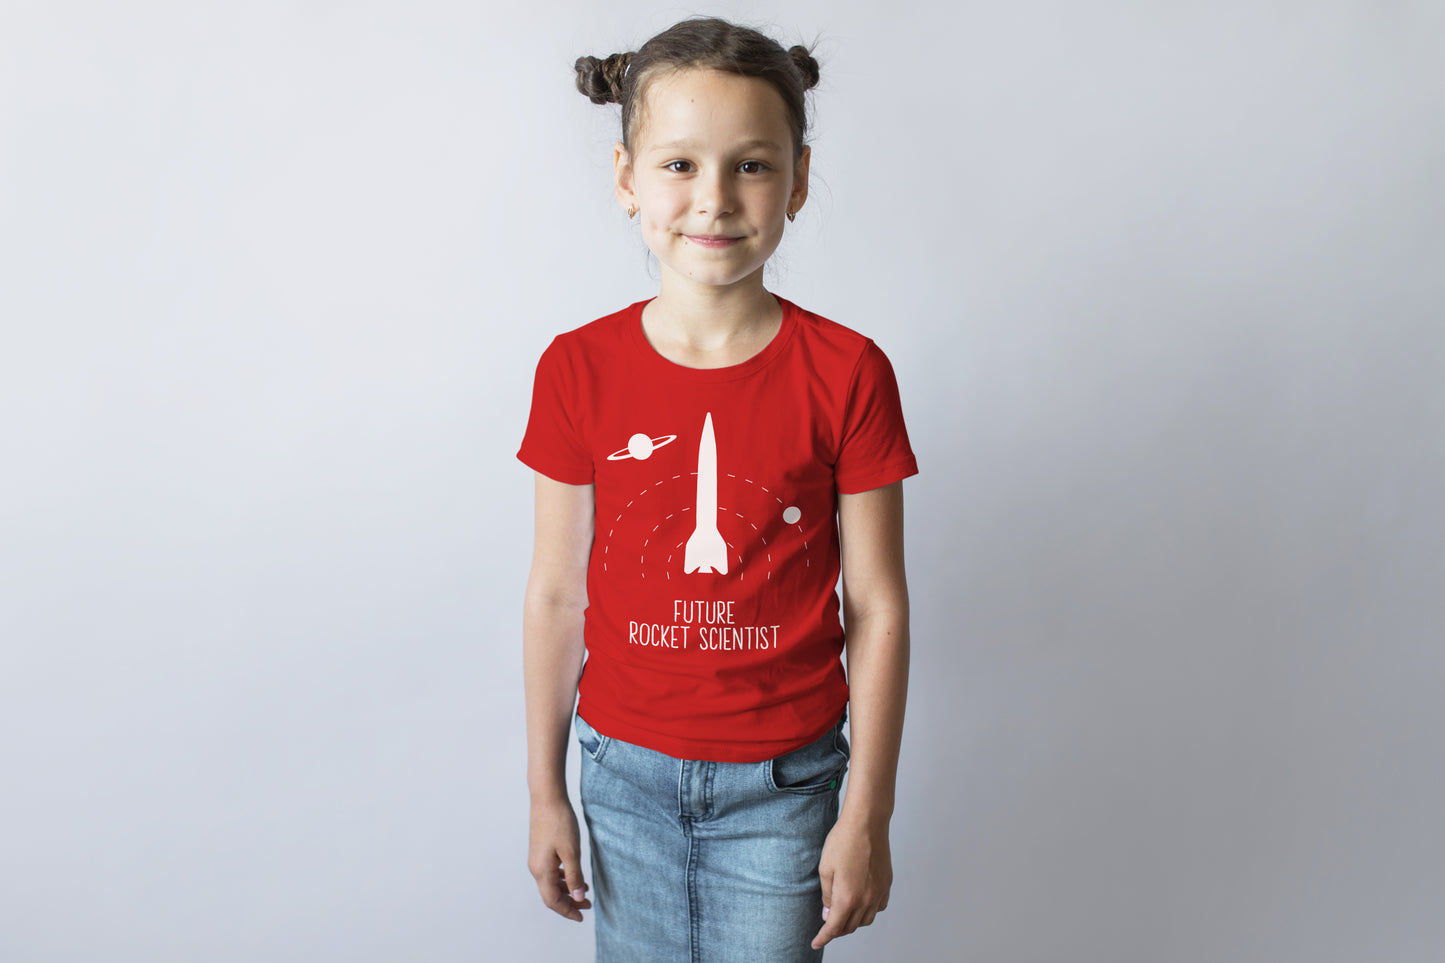 Future Rocket Scientist T-shirt for Engineer or Space Enthusaist